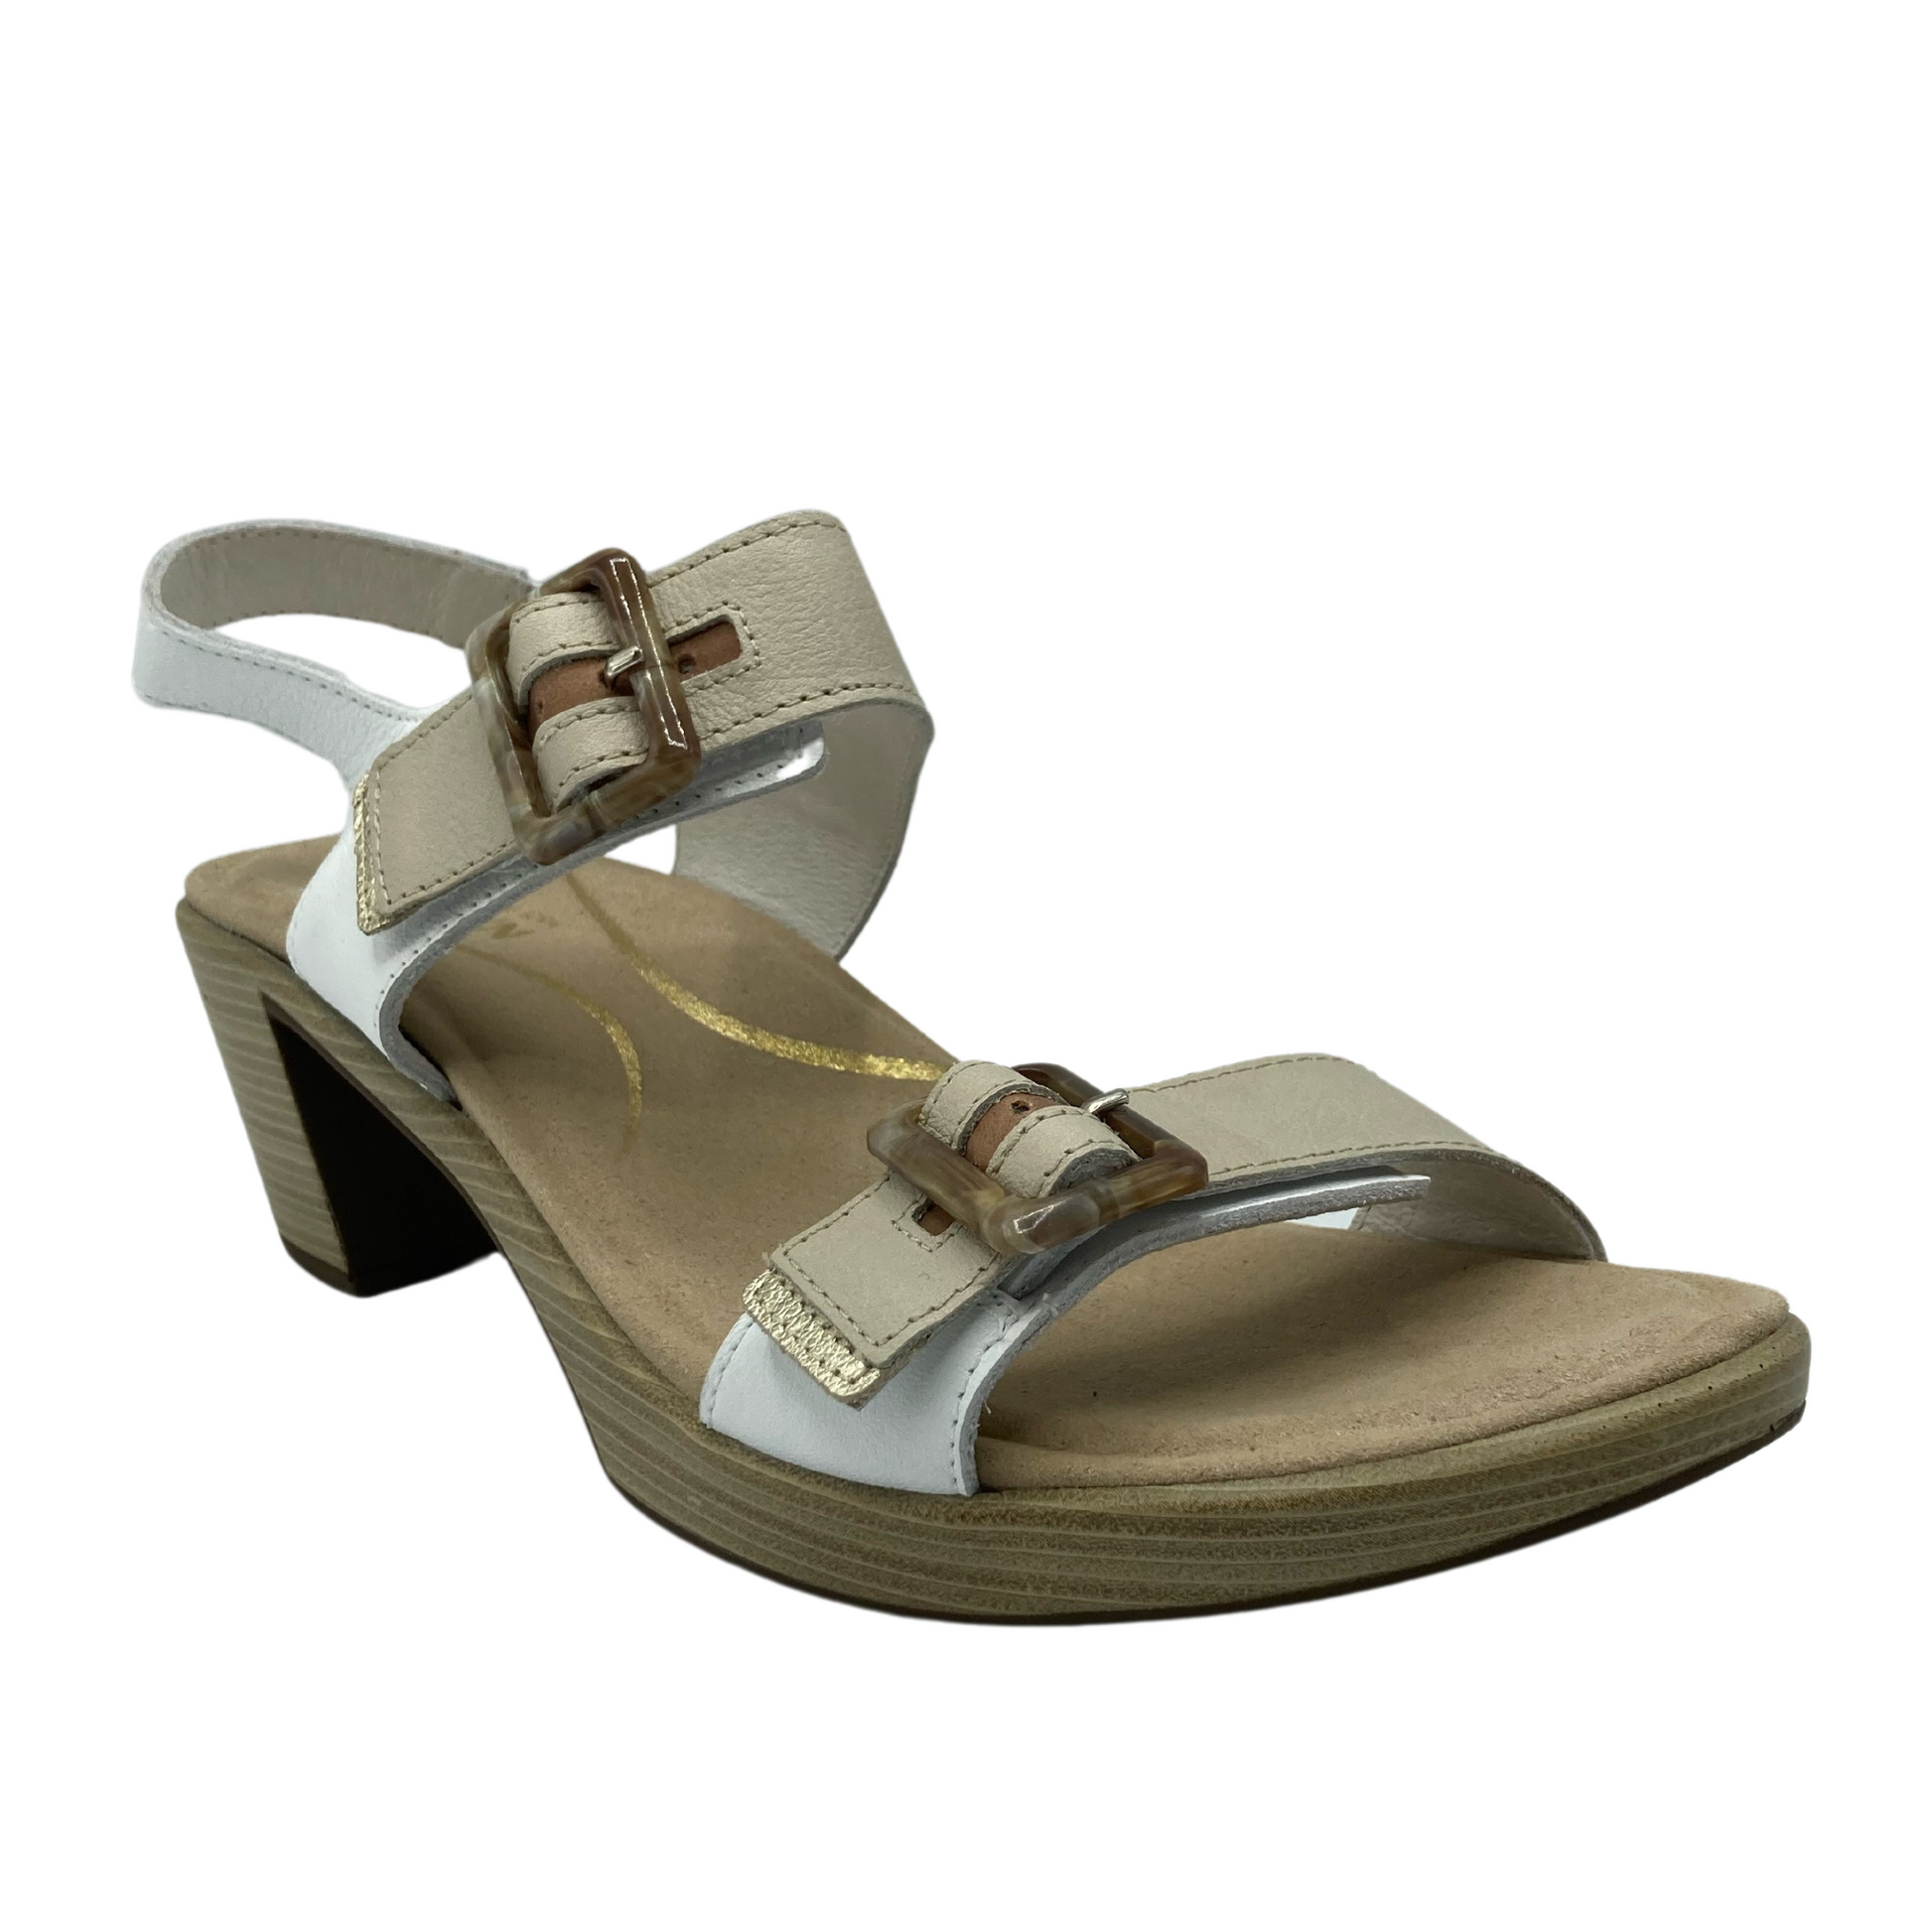 45 degree angled view of tan and white sandal with block heel and two buckle straps